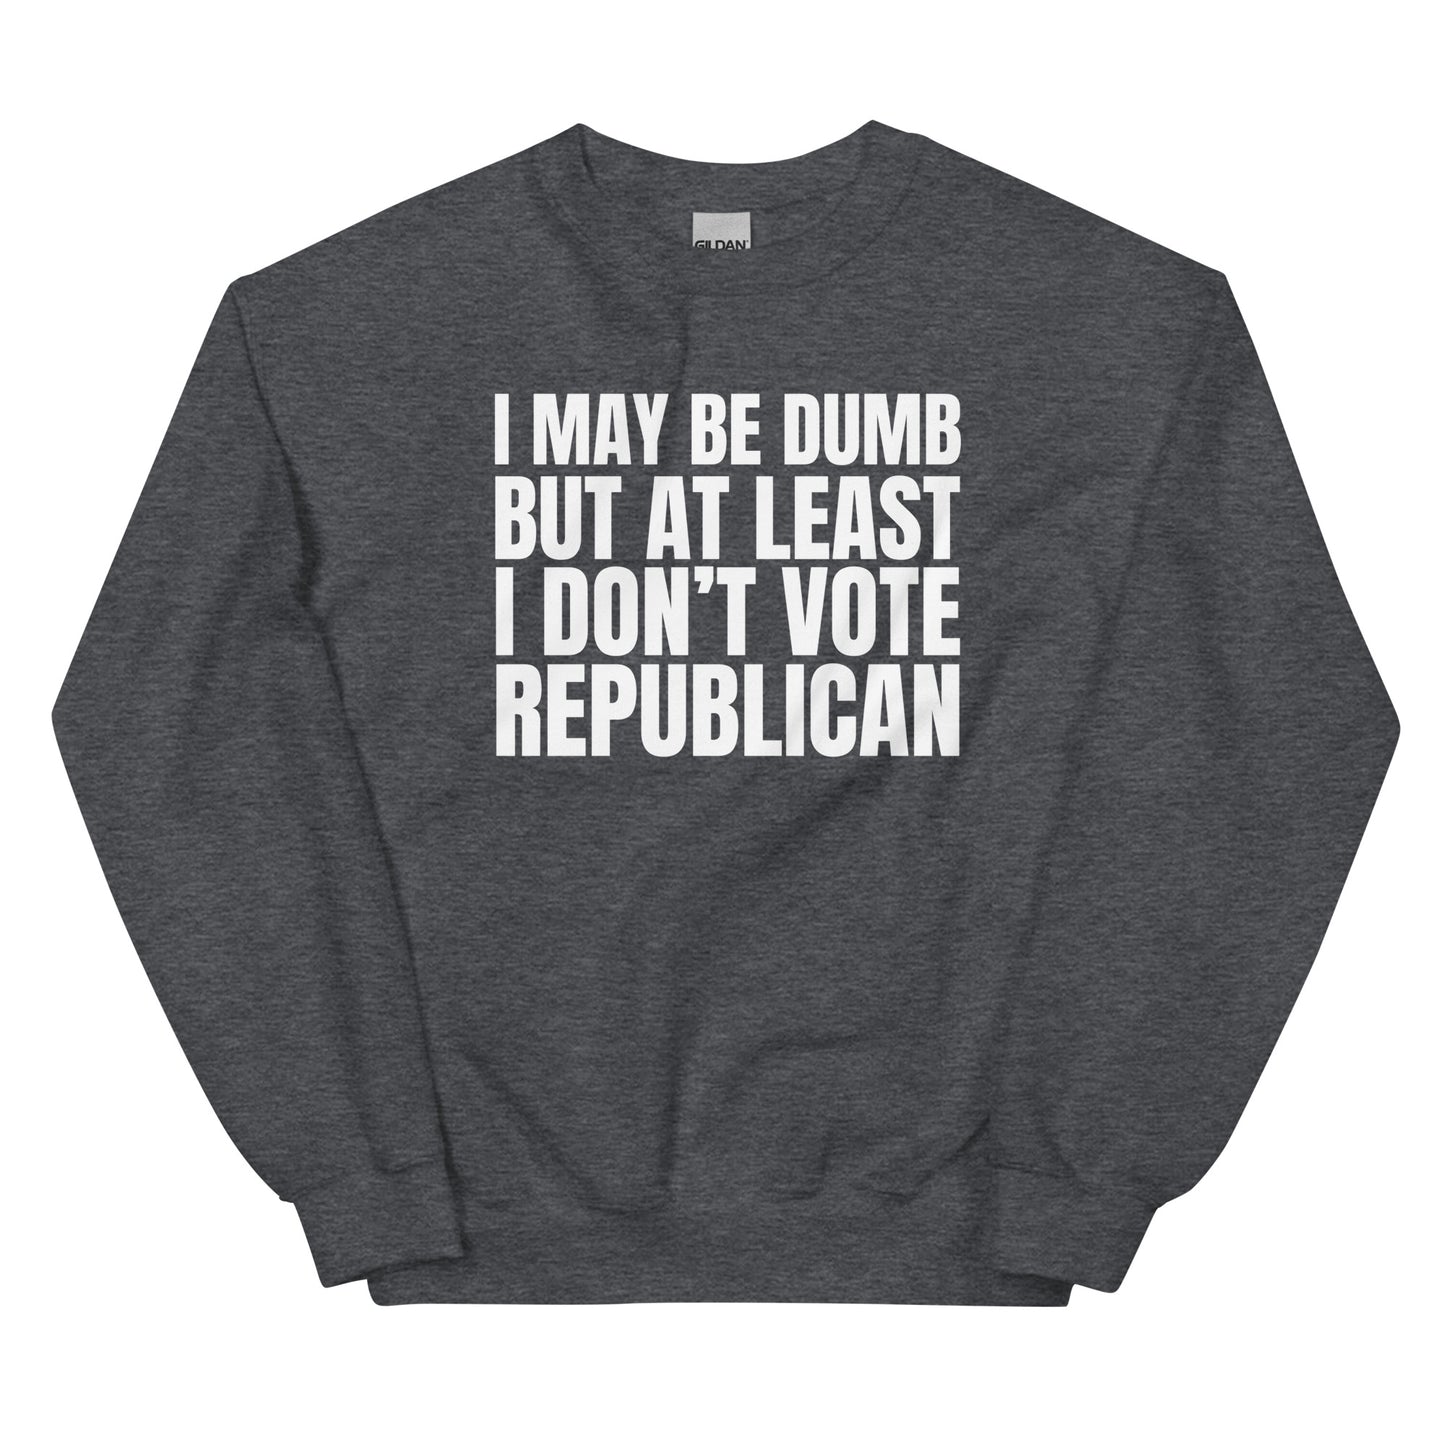 I May Be Dumb But At Least I Don't Vote Republican Unisex Sweatshirt